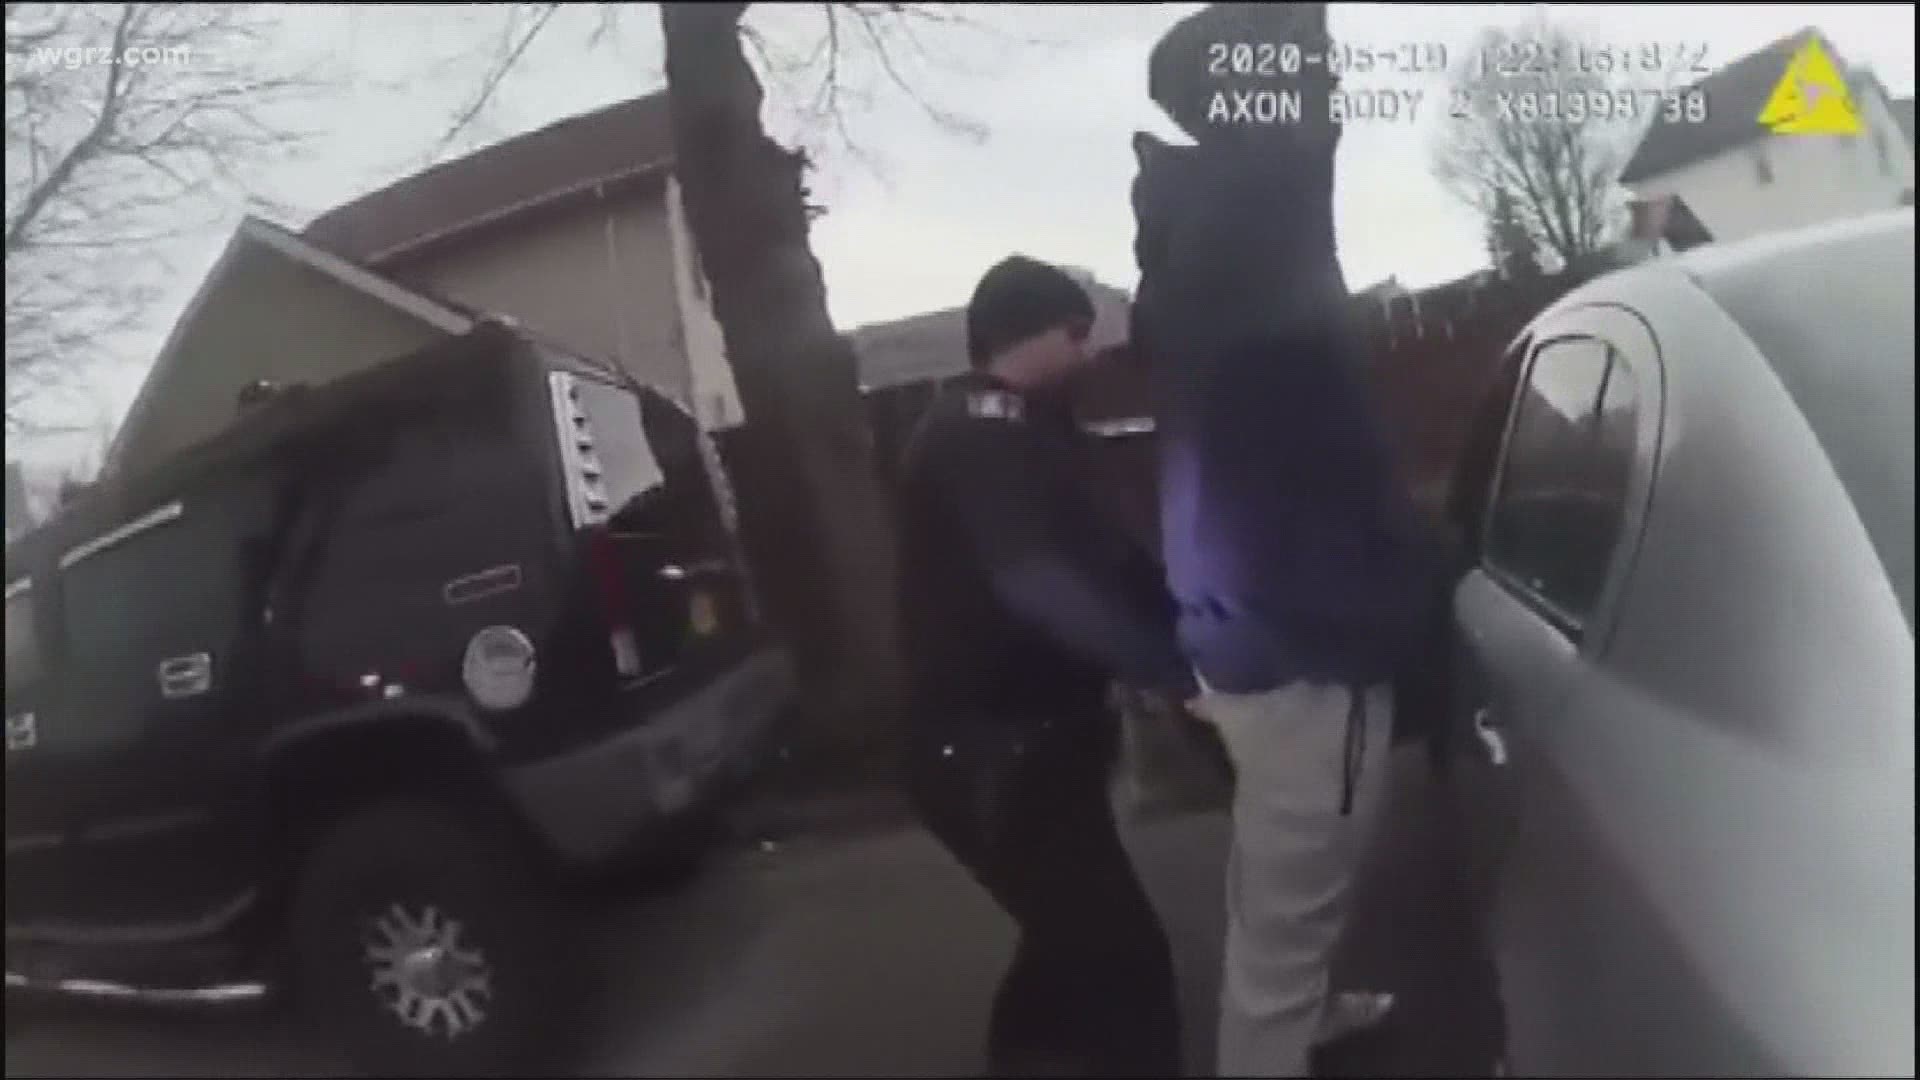 Body camera and citizen video show one of the officers punching Suttles in the face, following a traffic stop last May at the corner of Madison and Eagle in Buffalo.